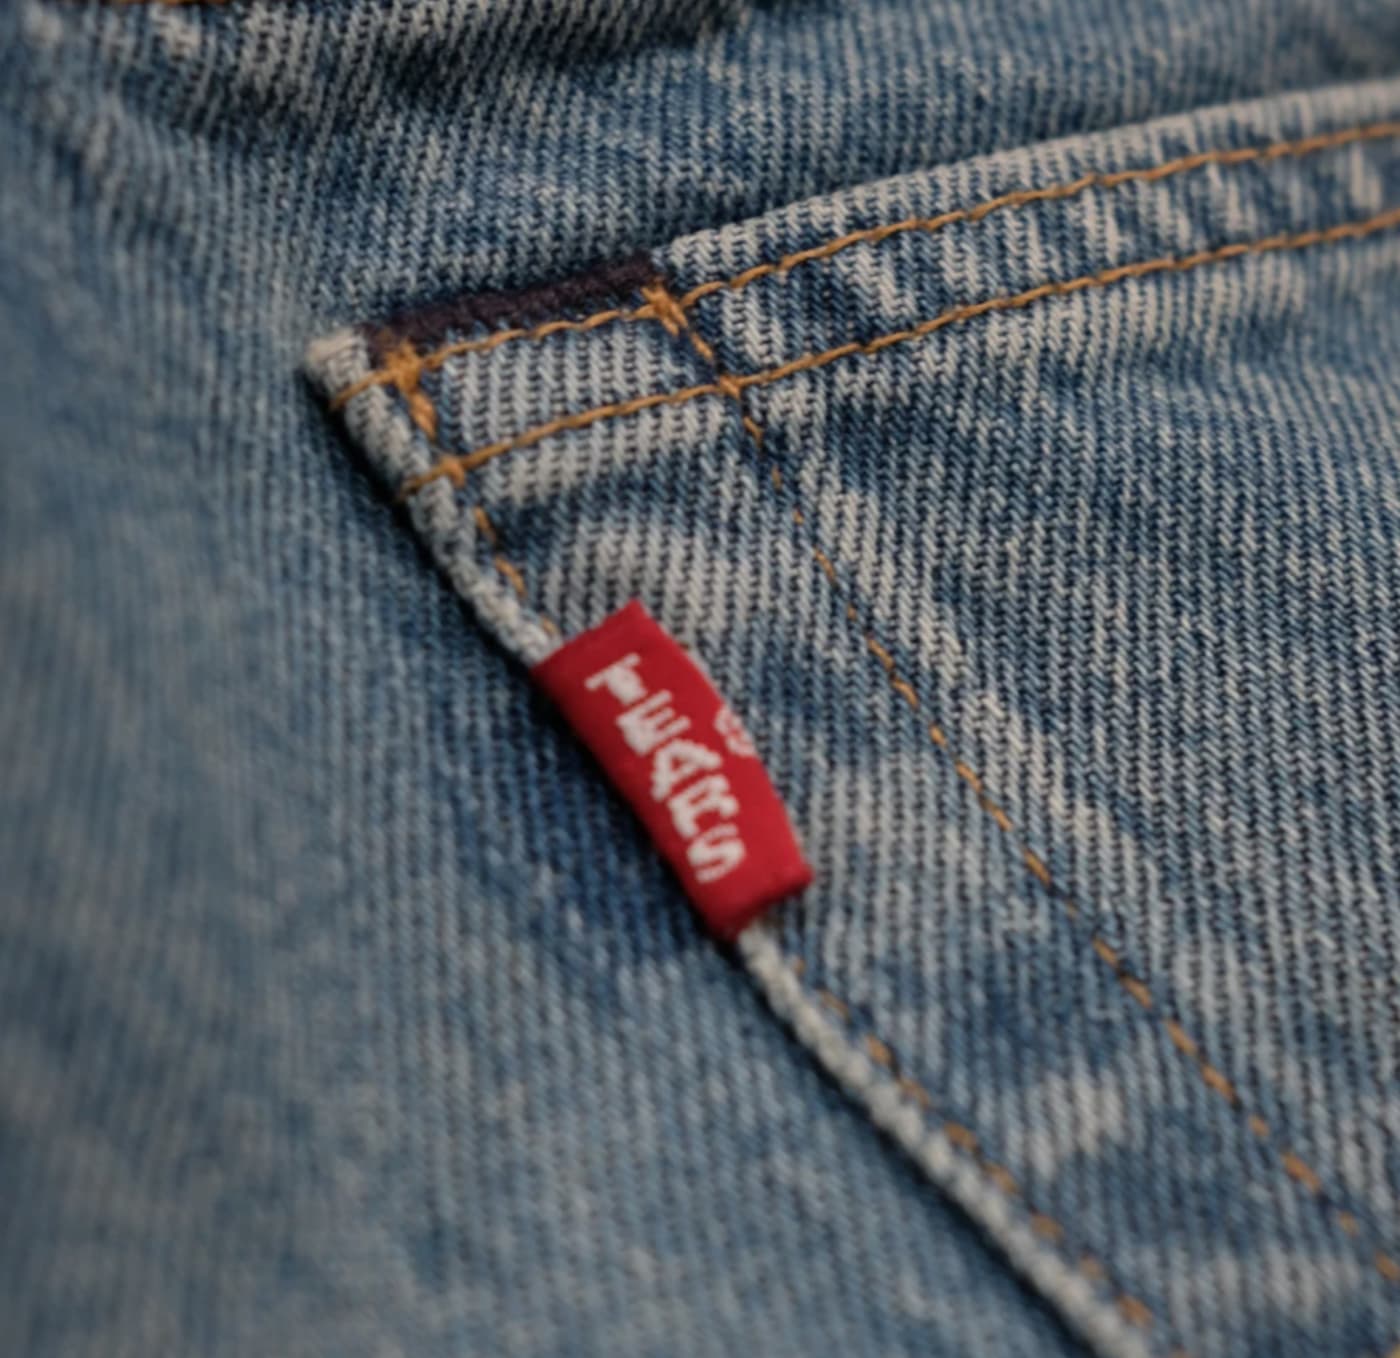 Denim Tears and Levi's Link Up for Two-Year Partnership Deal | Complex